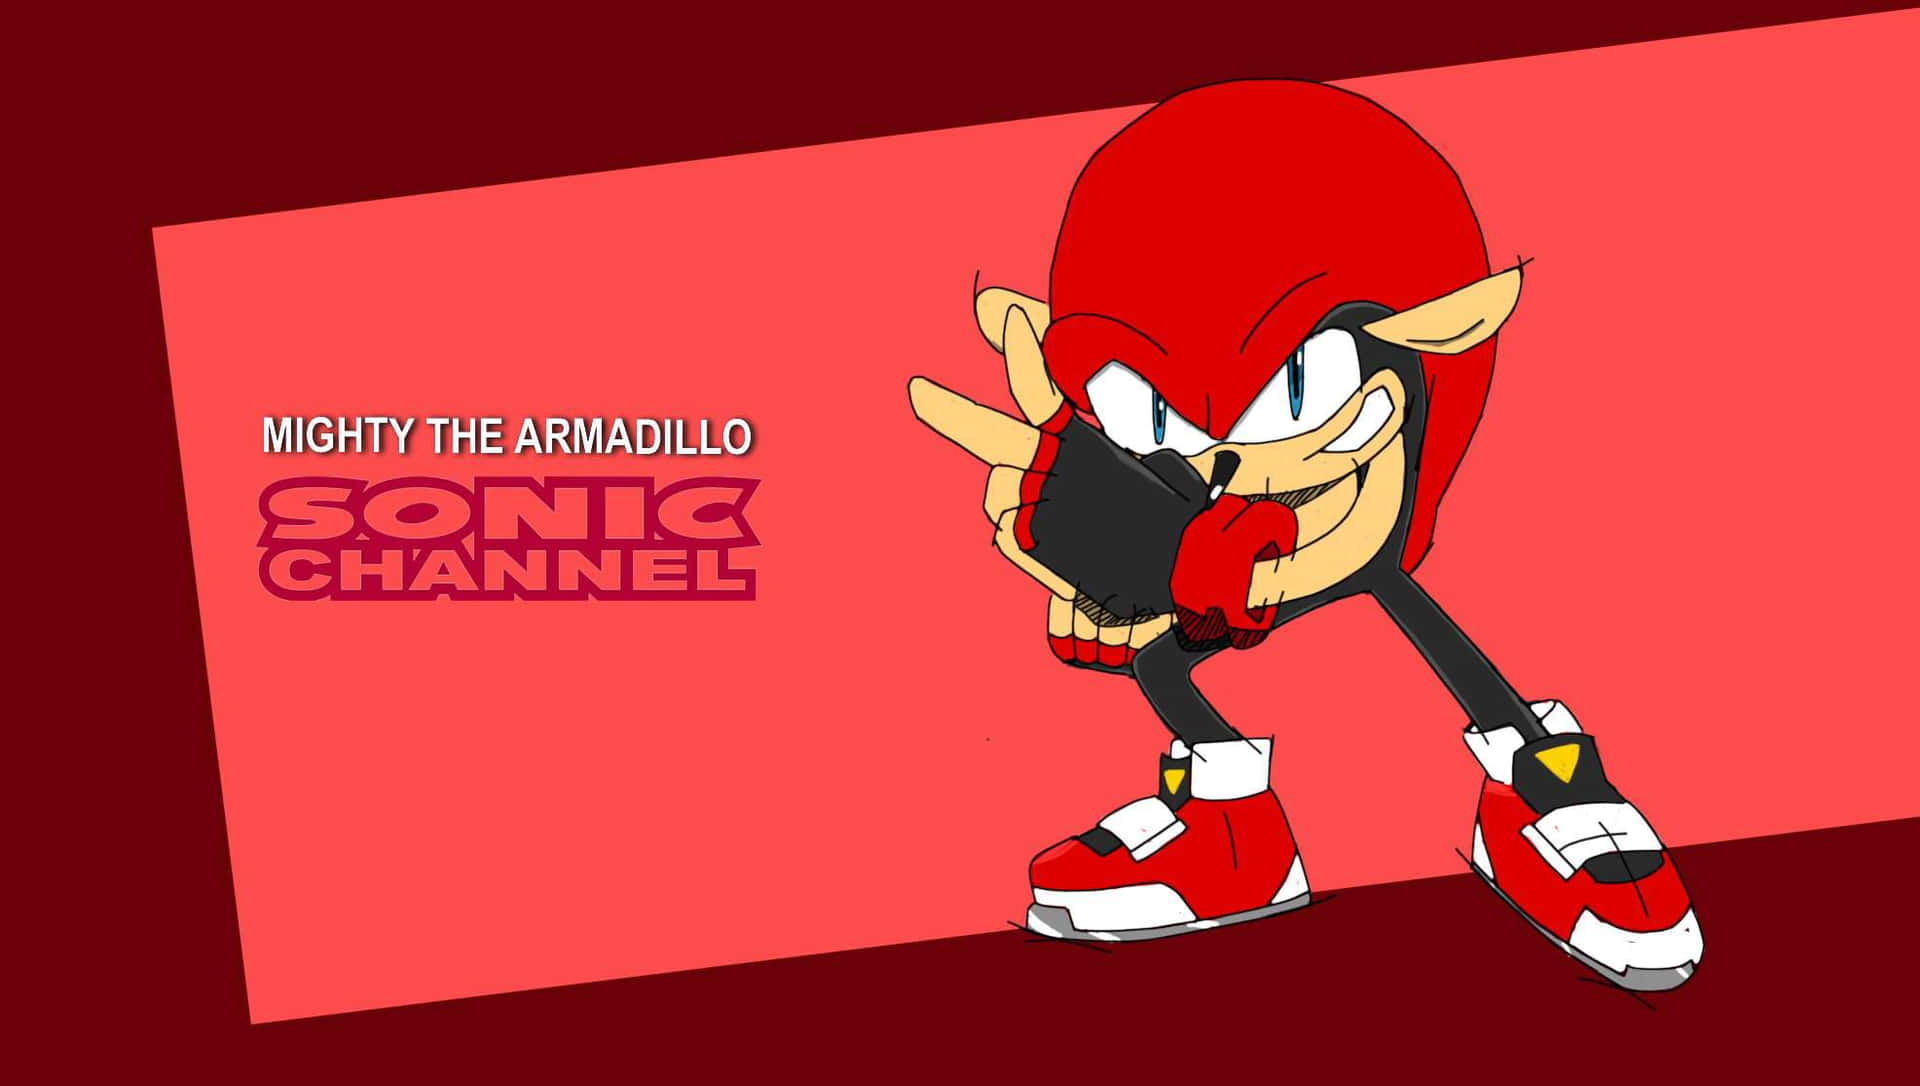 Download Mighty the Armadillo in Action Wallpaper